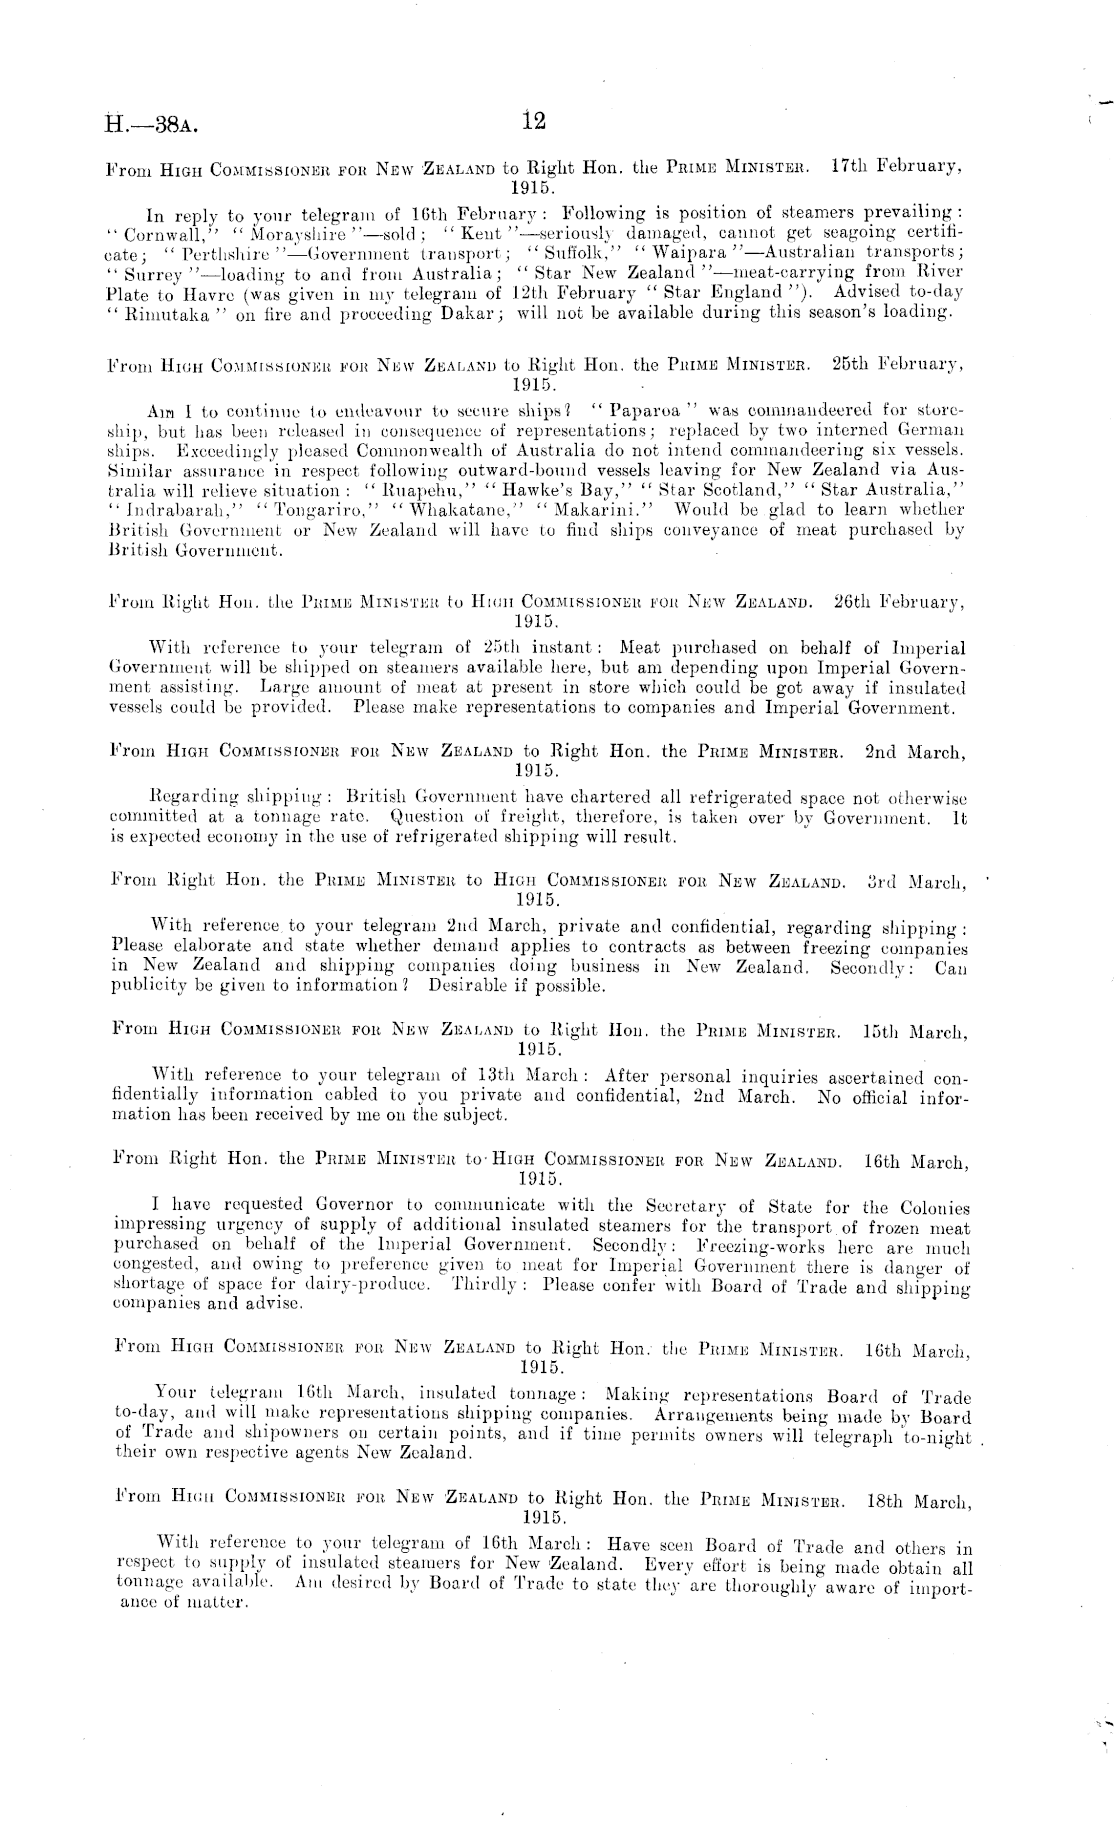 Papers Past Parliamentary Papers Appendix To The Journals Of The House Of Representatives 1919 Session I Page 12